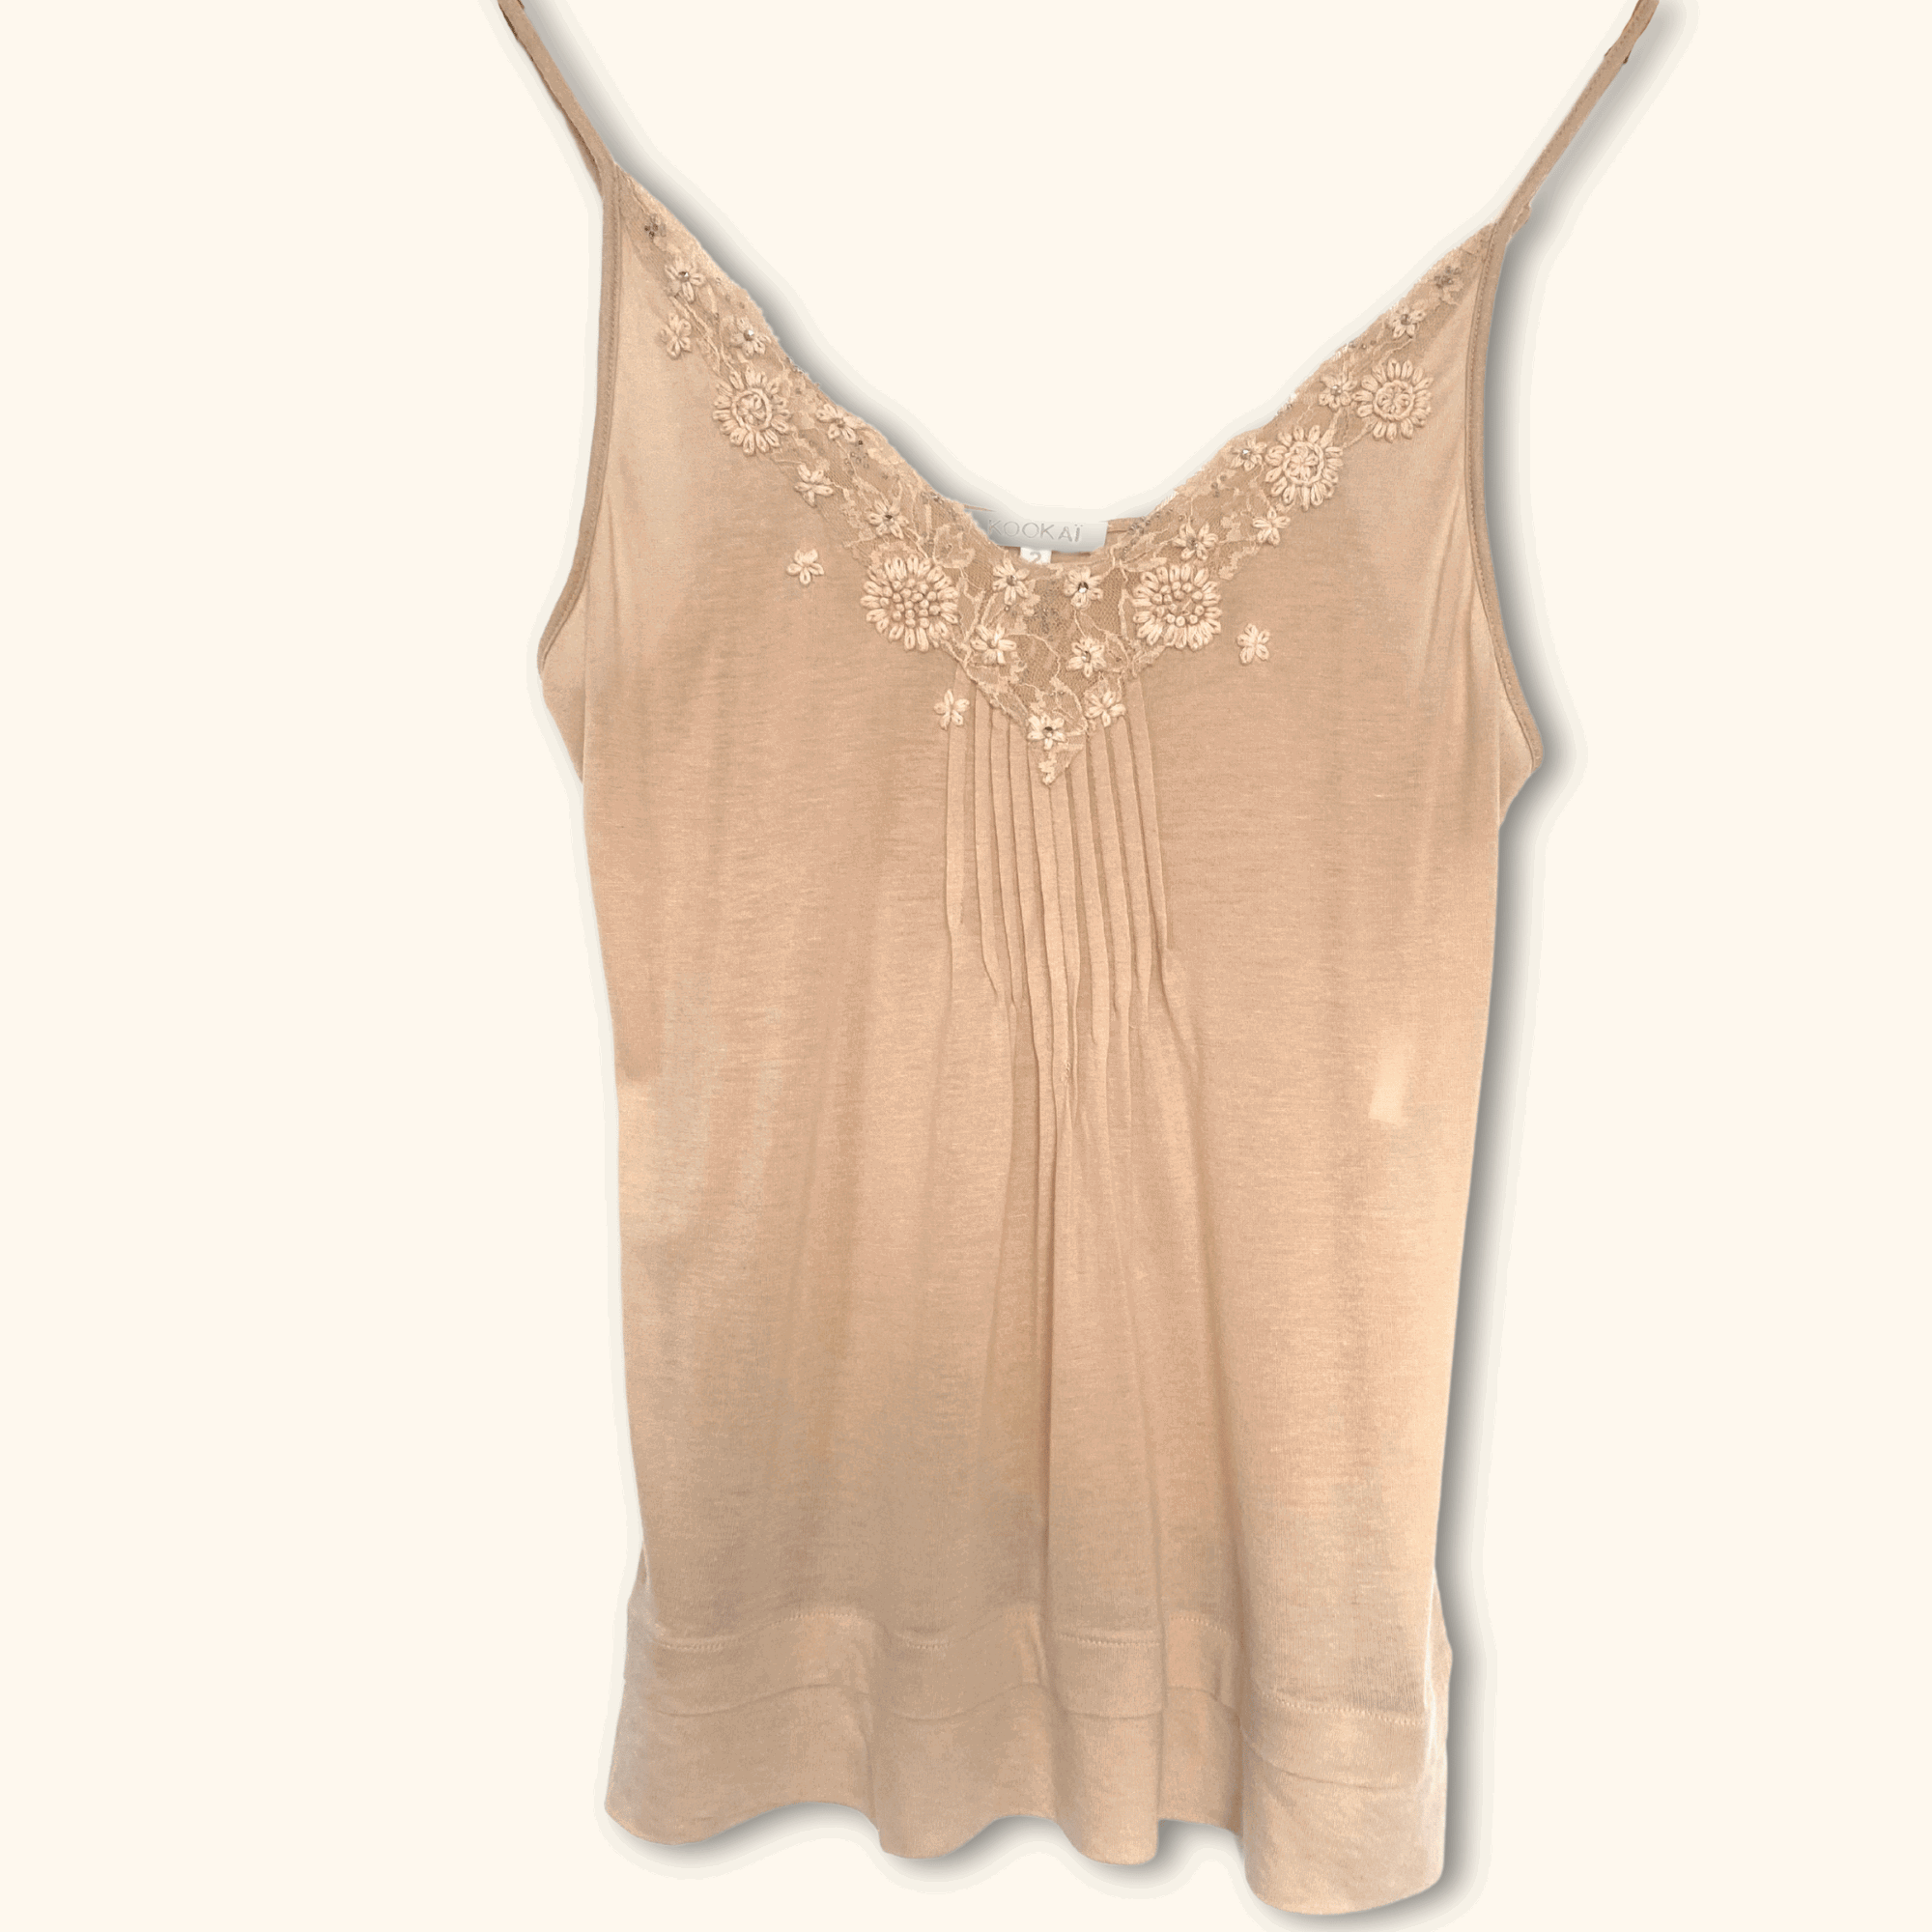 Y2K Floral Lace Cami Top Pink - Size Small - Sunshine Thrift - Tops